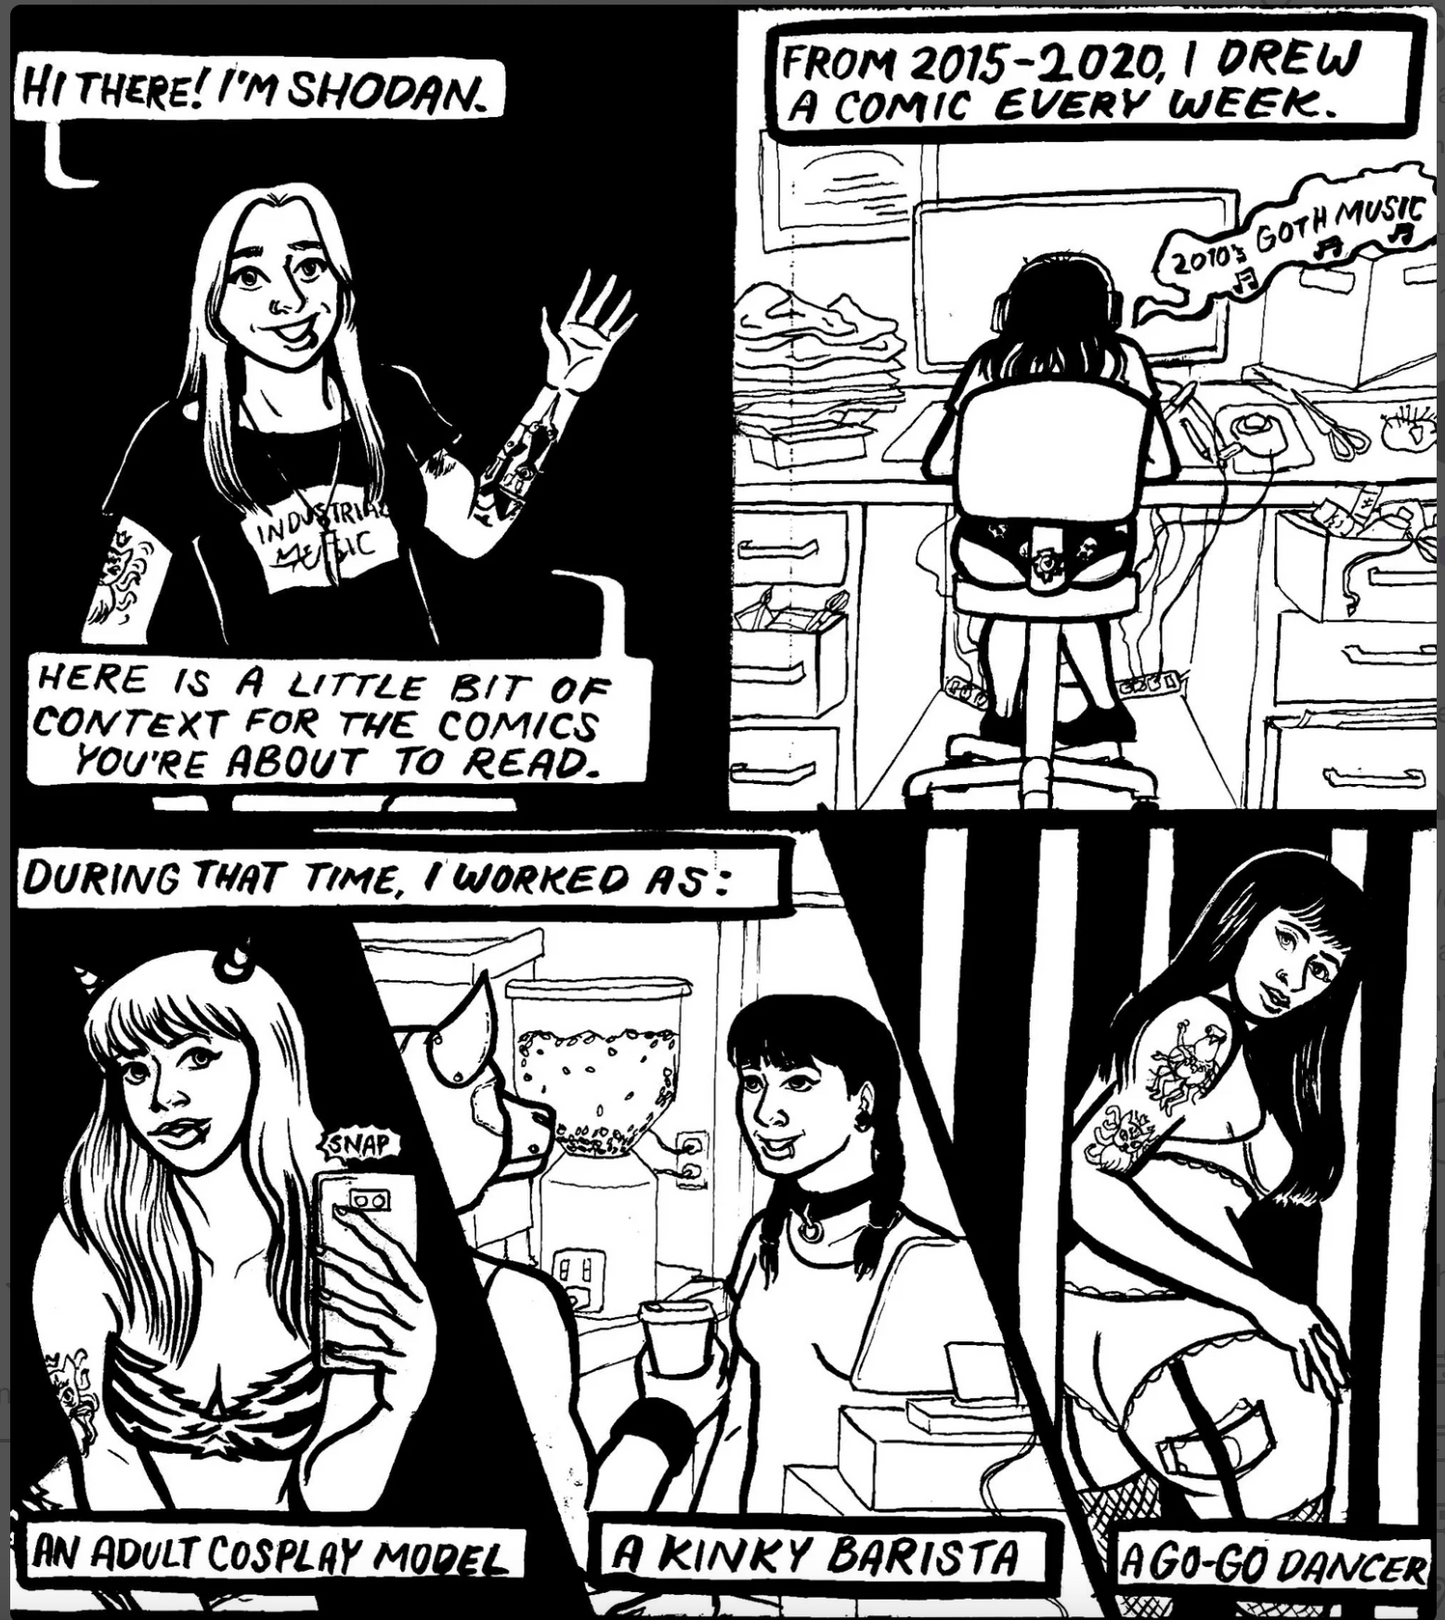 Naked Girl Comics: A Look Inside the Life of a Professional Hot Goth Girl by Turbocunt